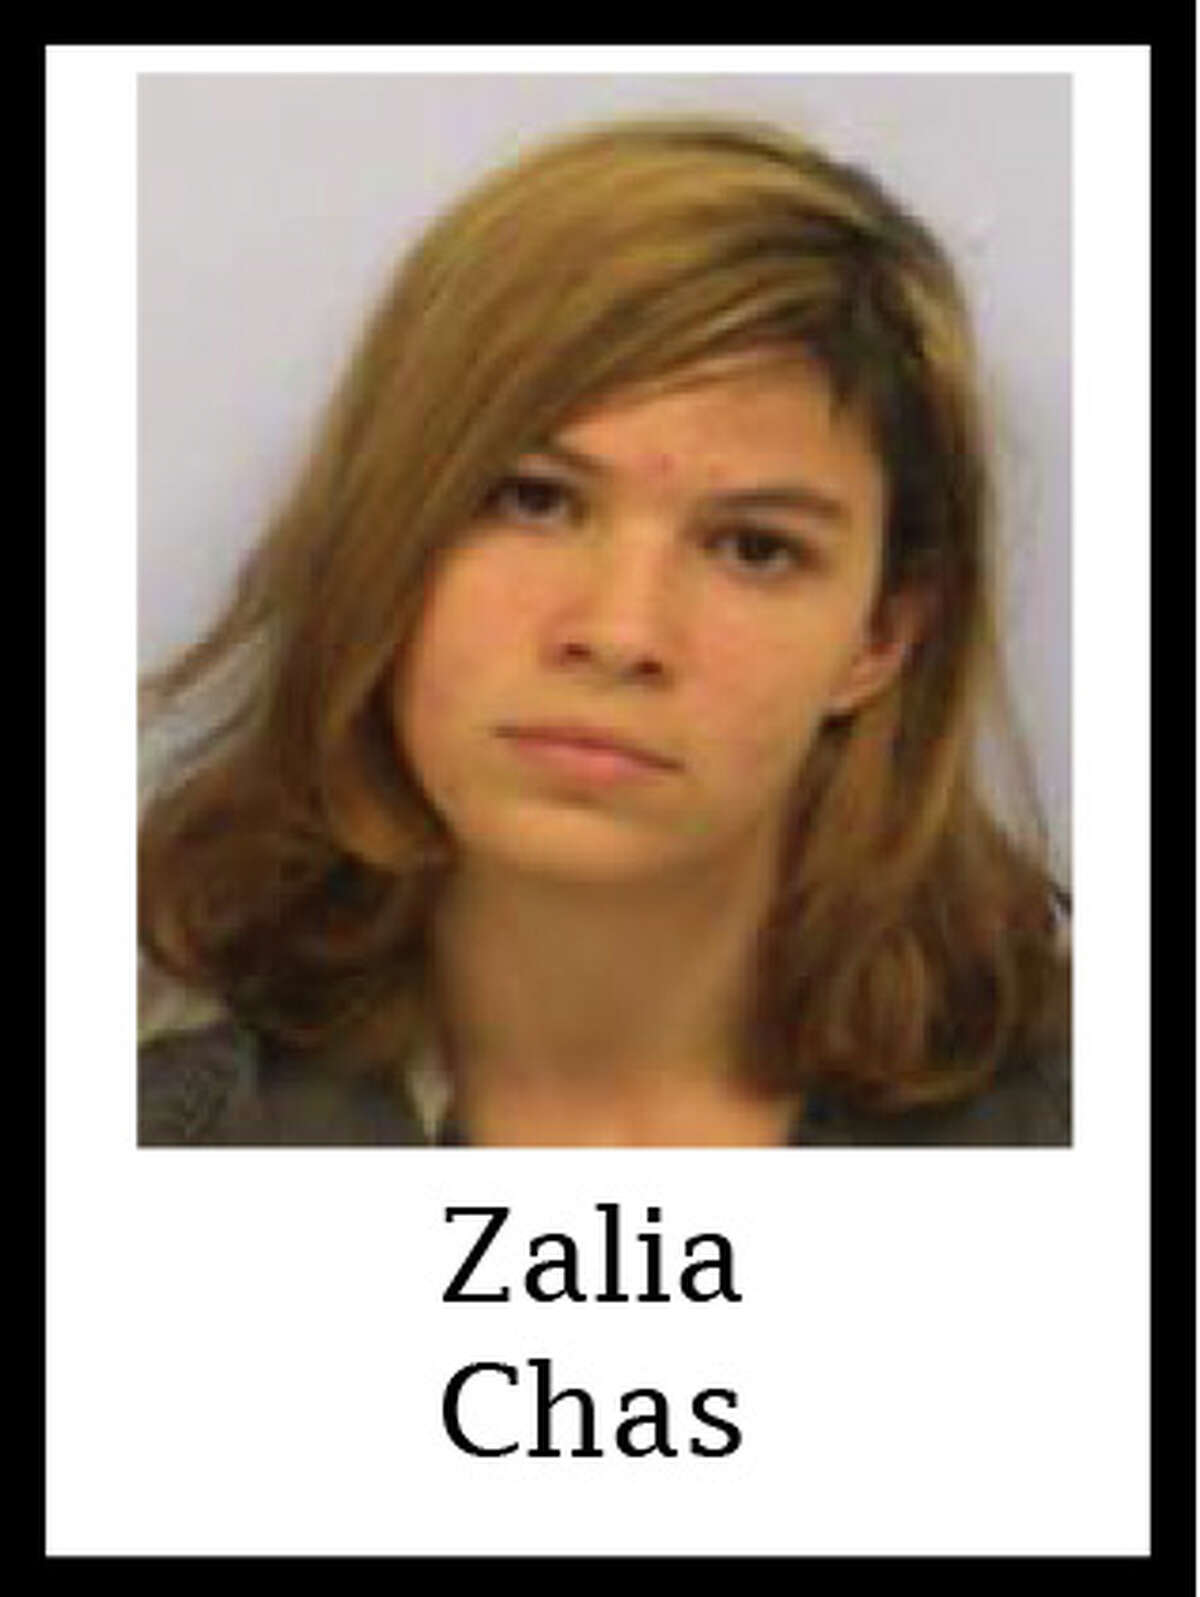 Zalia Chas Charge: Possession of a Controlled Substance with Intent to Distribute (First-Degree Felony)